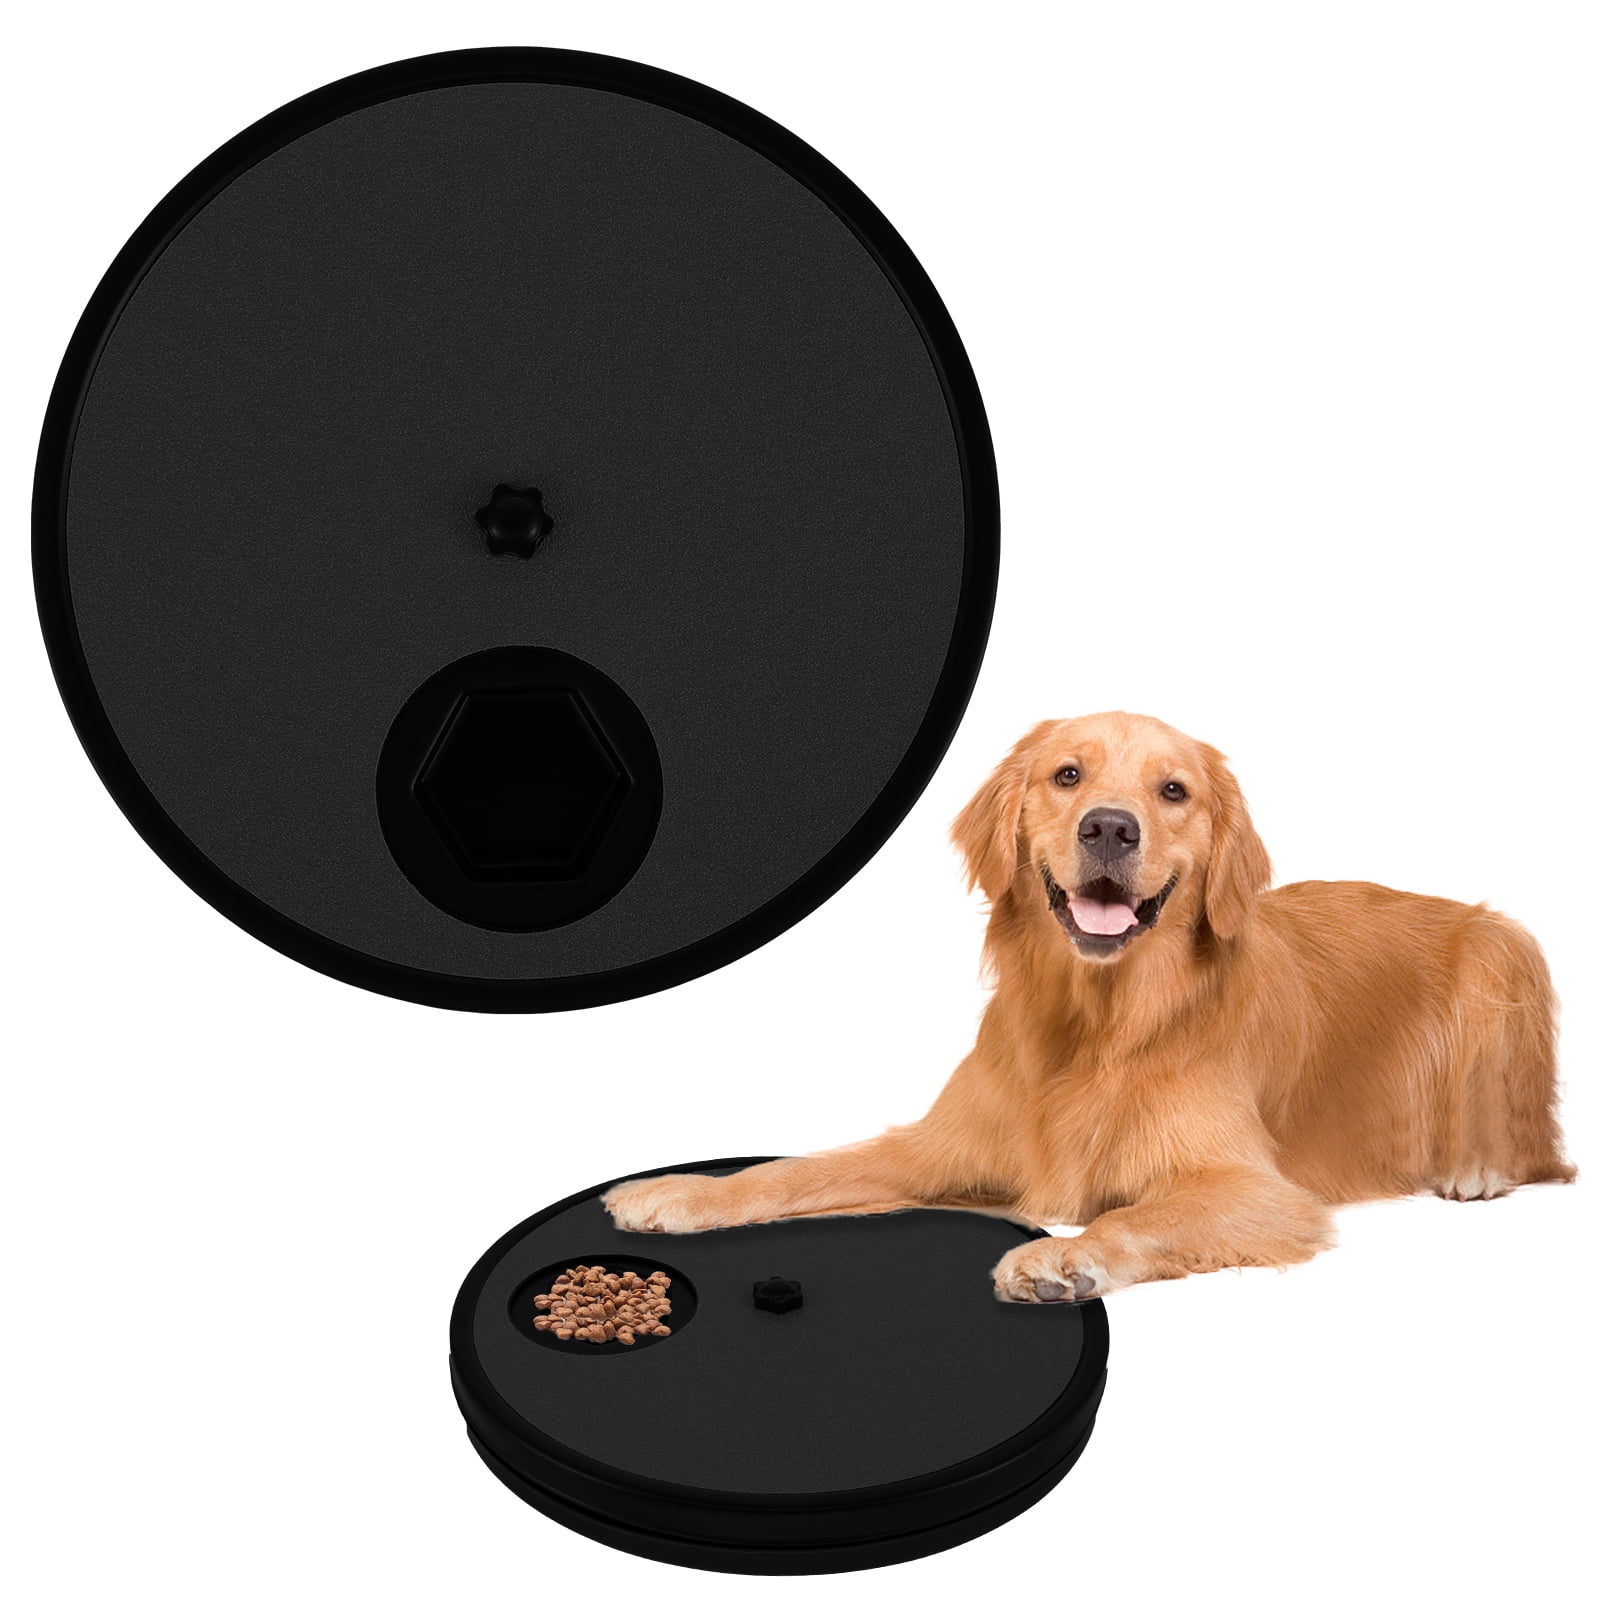 Amazon.com : ANZOME Dog Scratch Board, Dog Scratch Pad for Nails Easily to  Trim Nail for Dog - Interactive and Reward-Based Solution for Stressful Nail  Trimming 19.7inches * 10inches : Pet Supplies